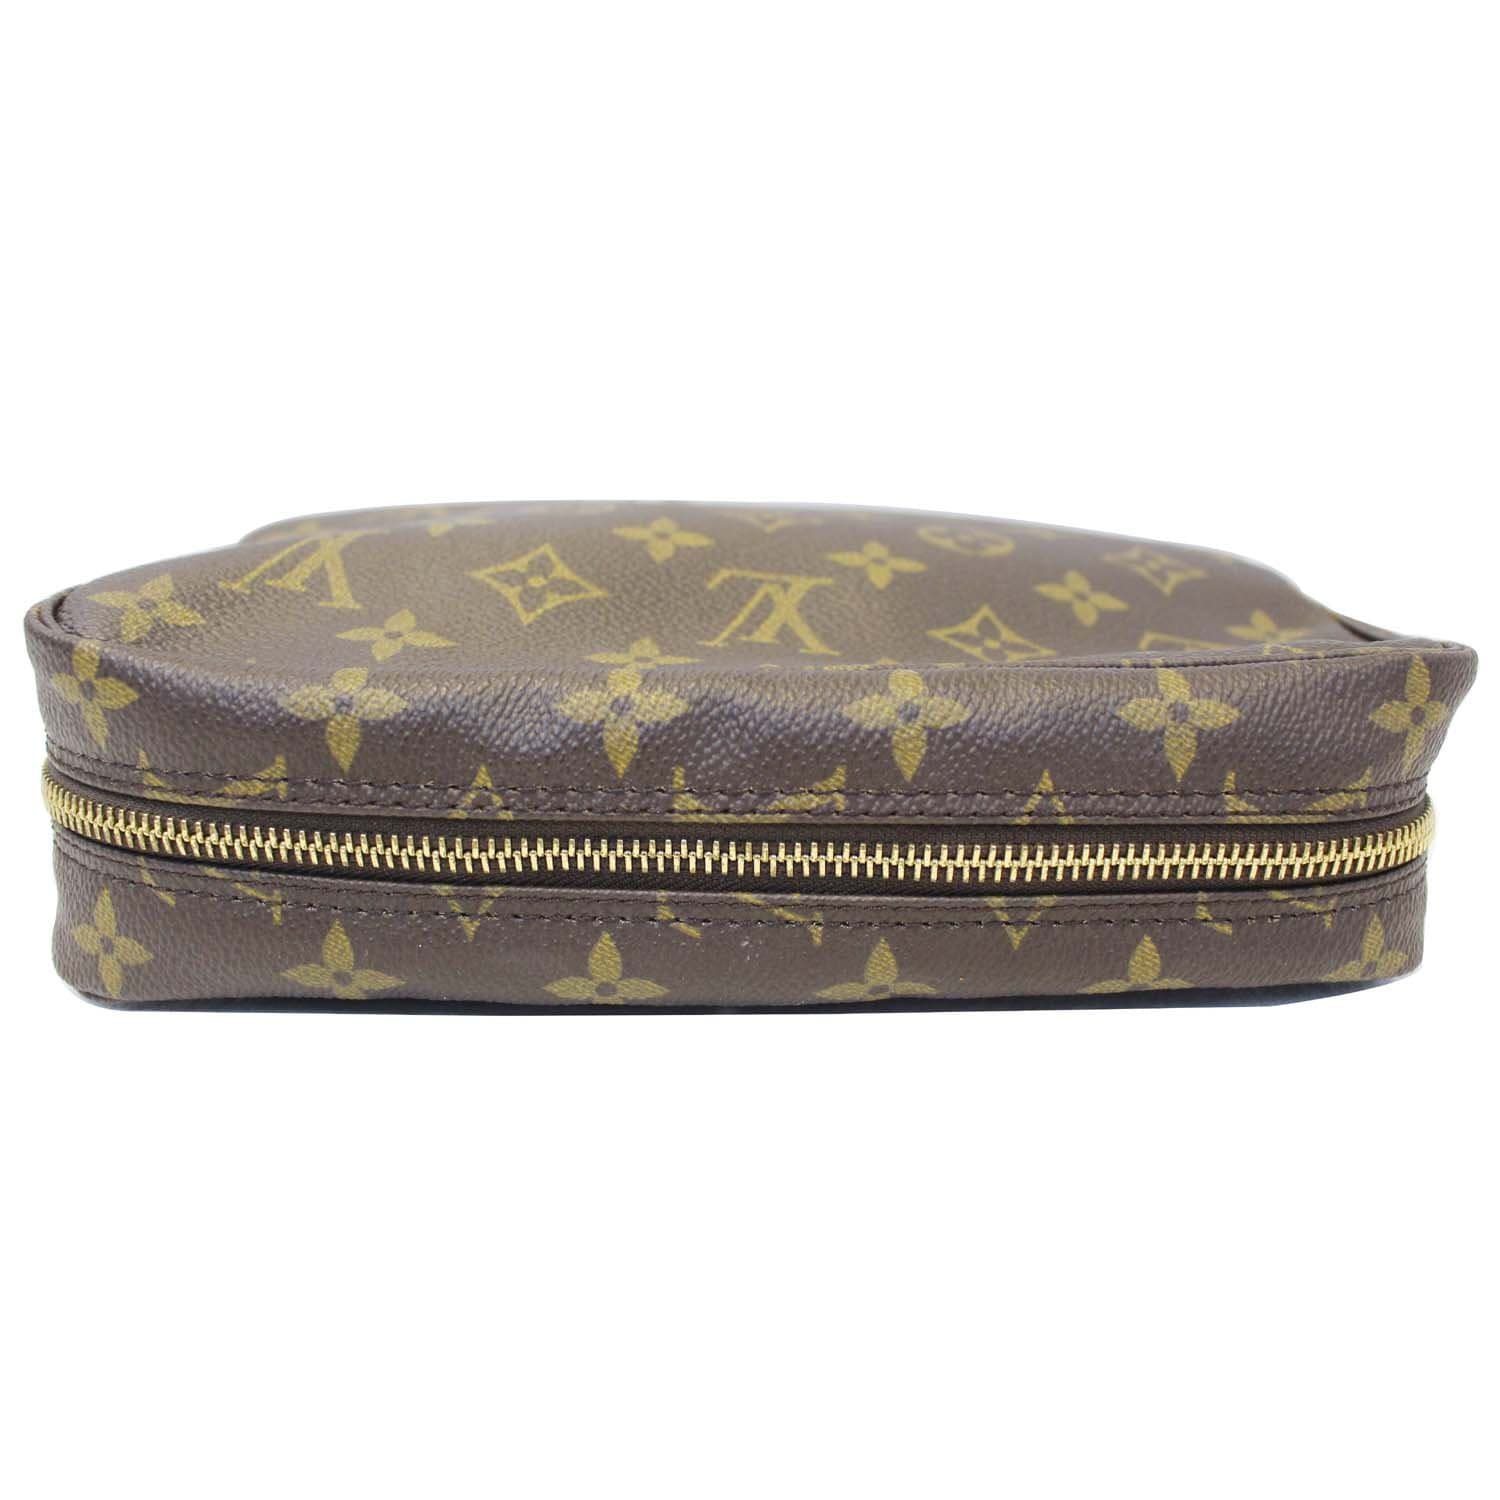 Louis Vuitton Green Palana Trousse Cosmetic Pouch Make Up Toiletry Case 1224lv29